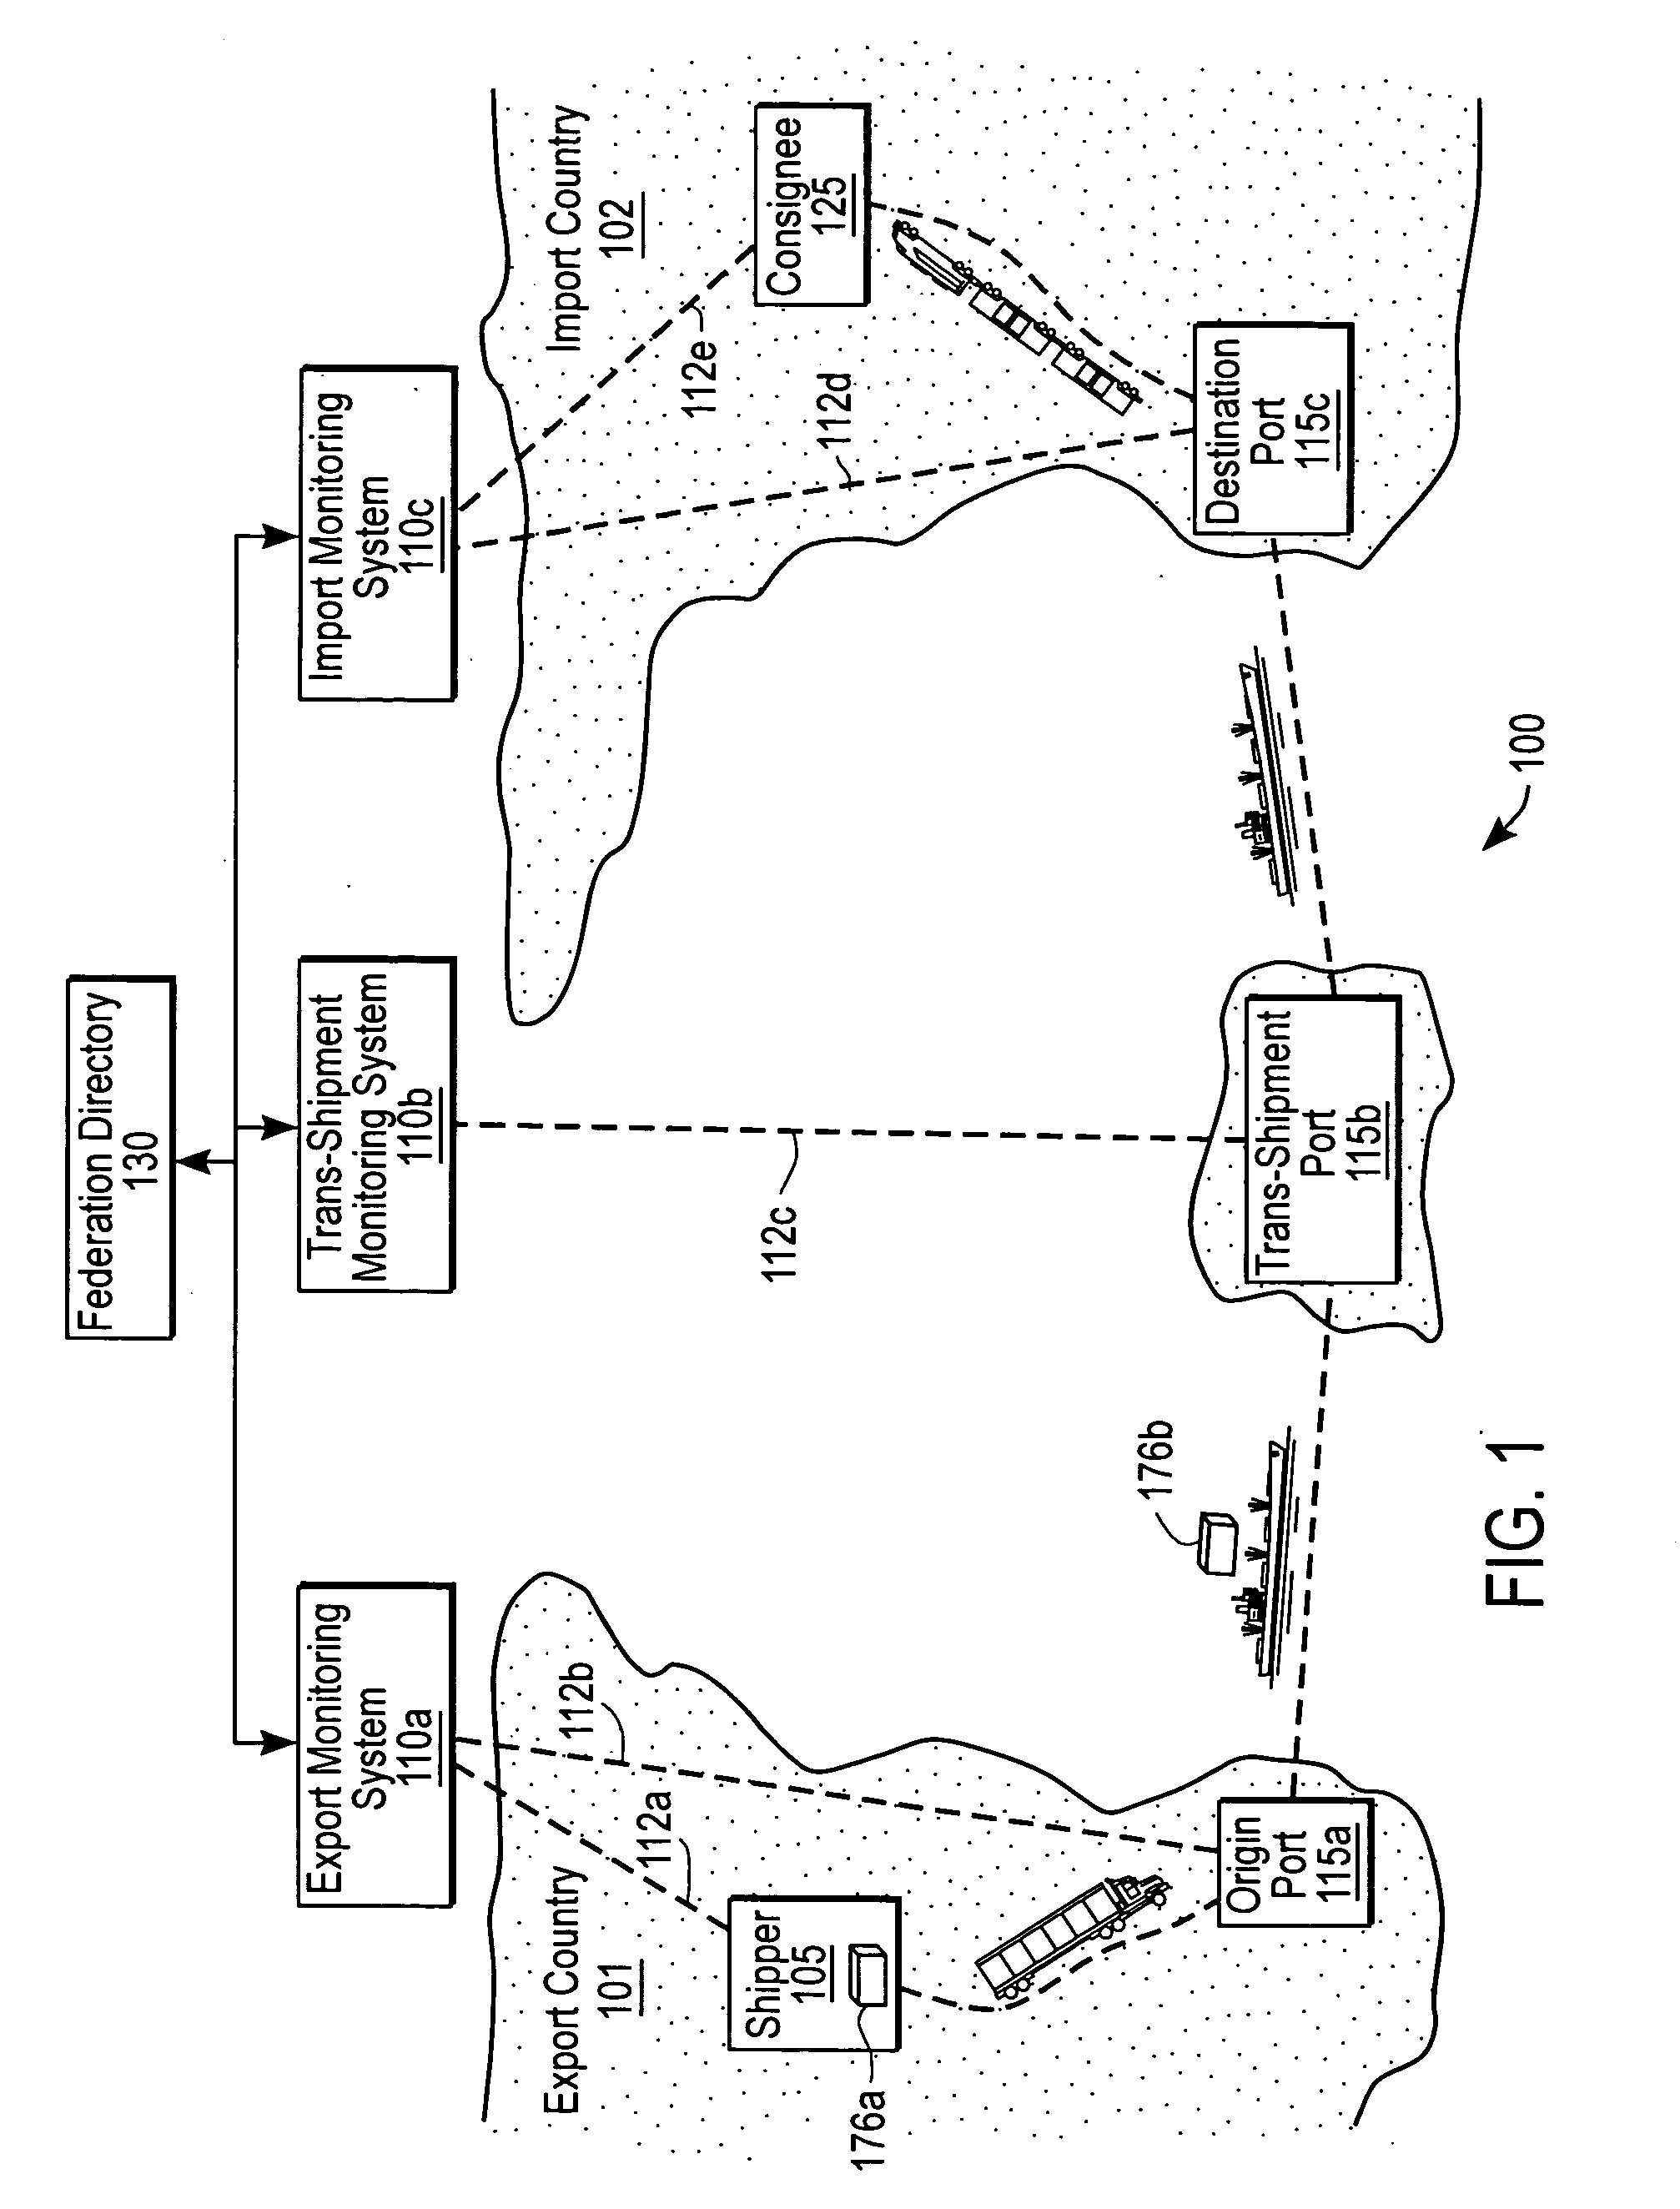 Federated system for monitoring physical assets